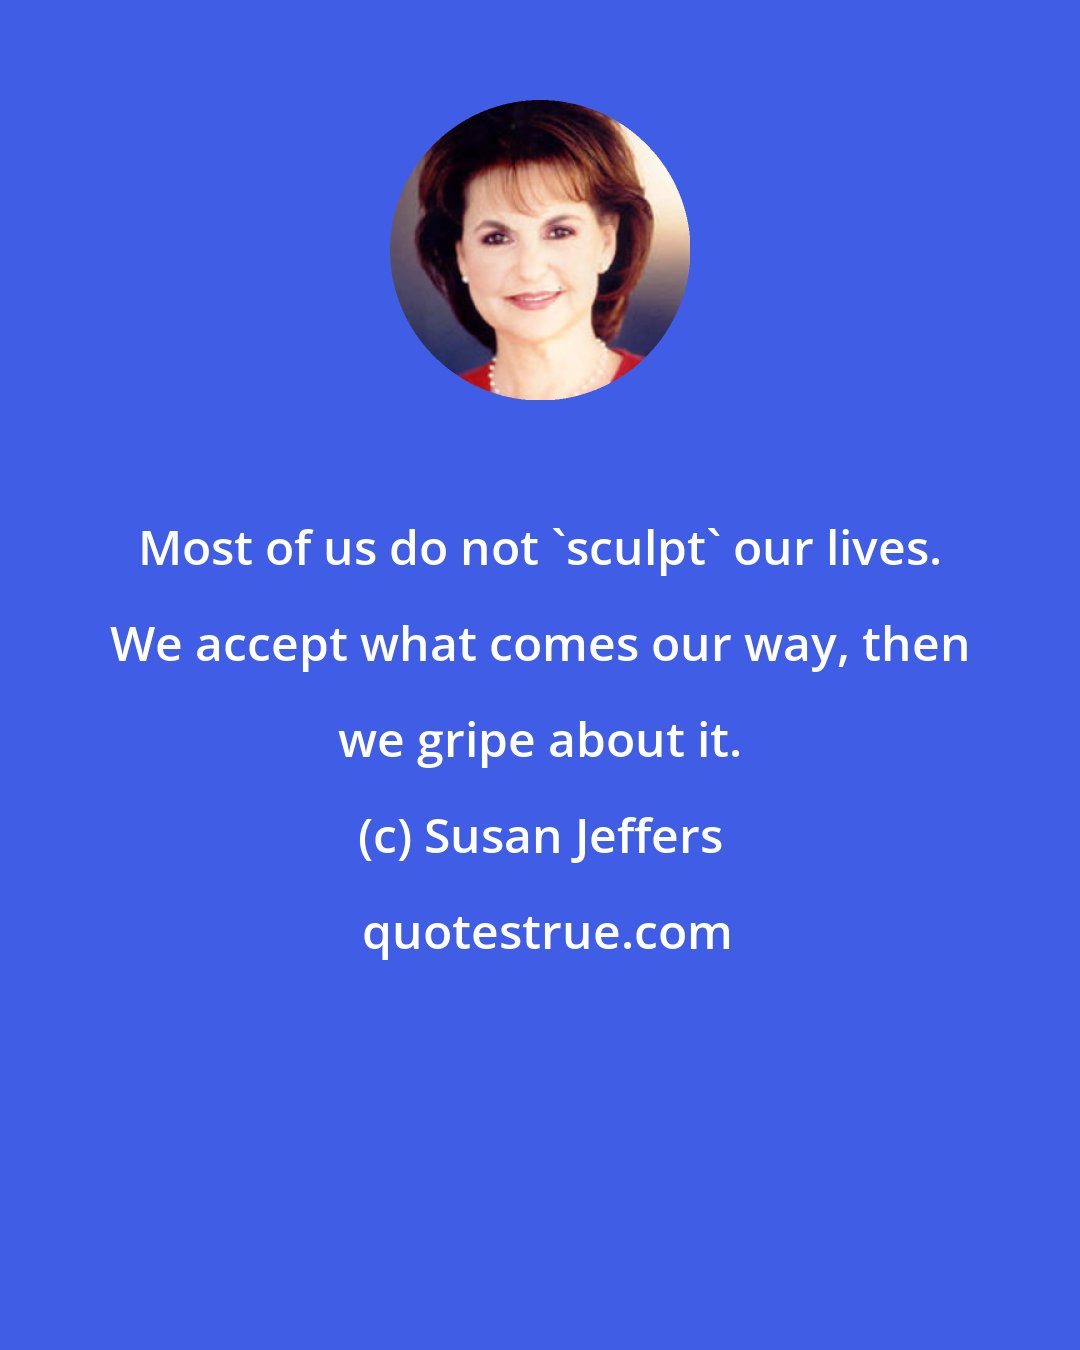 Susan Jeffers: Most of us do not 'sculpt' our lives. We accept what comes our way, then we gripe about it.